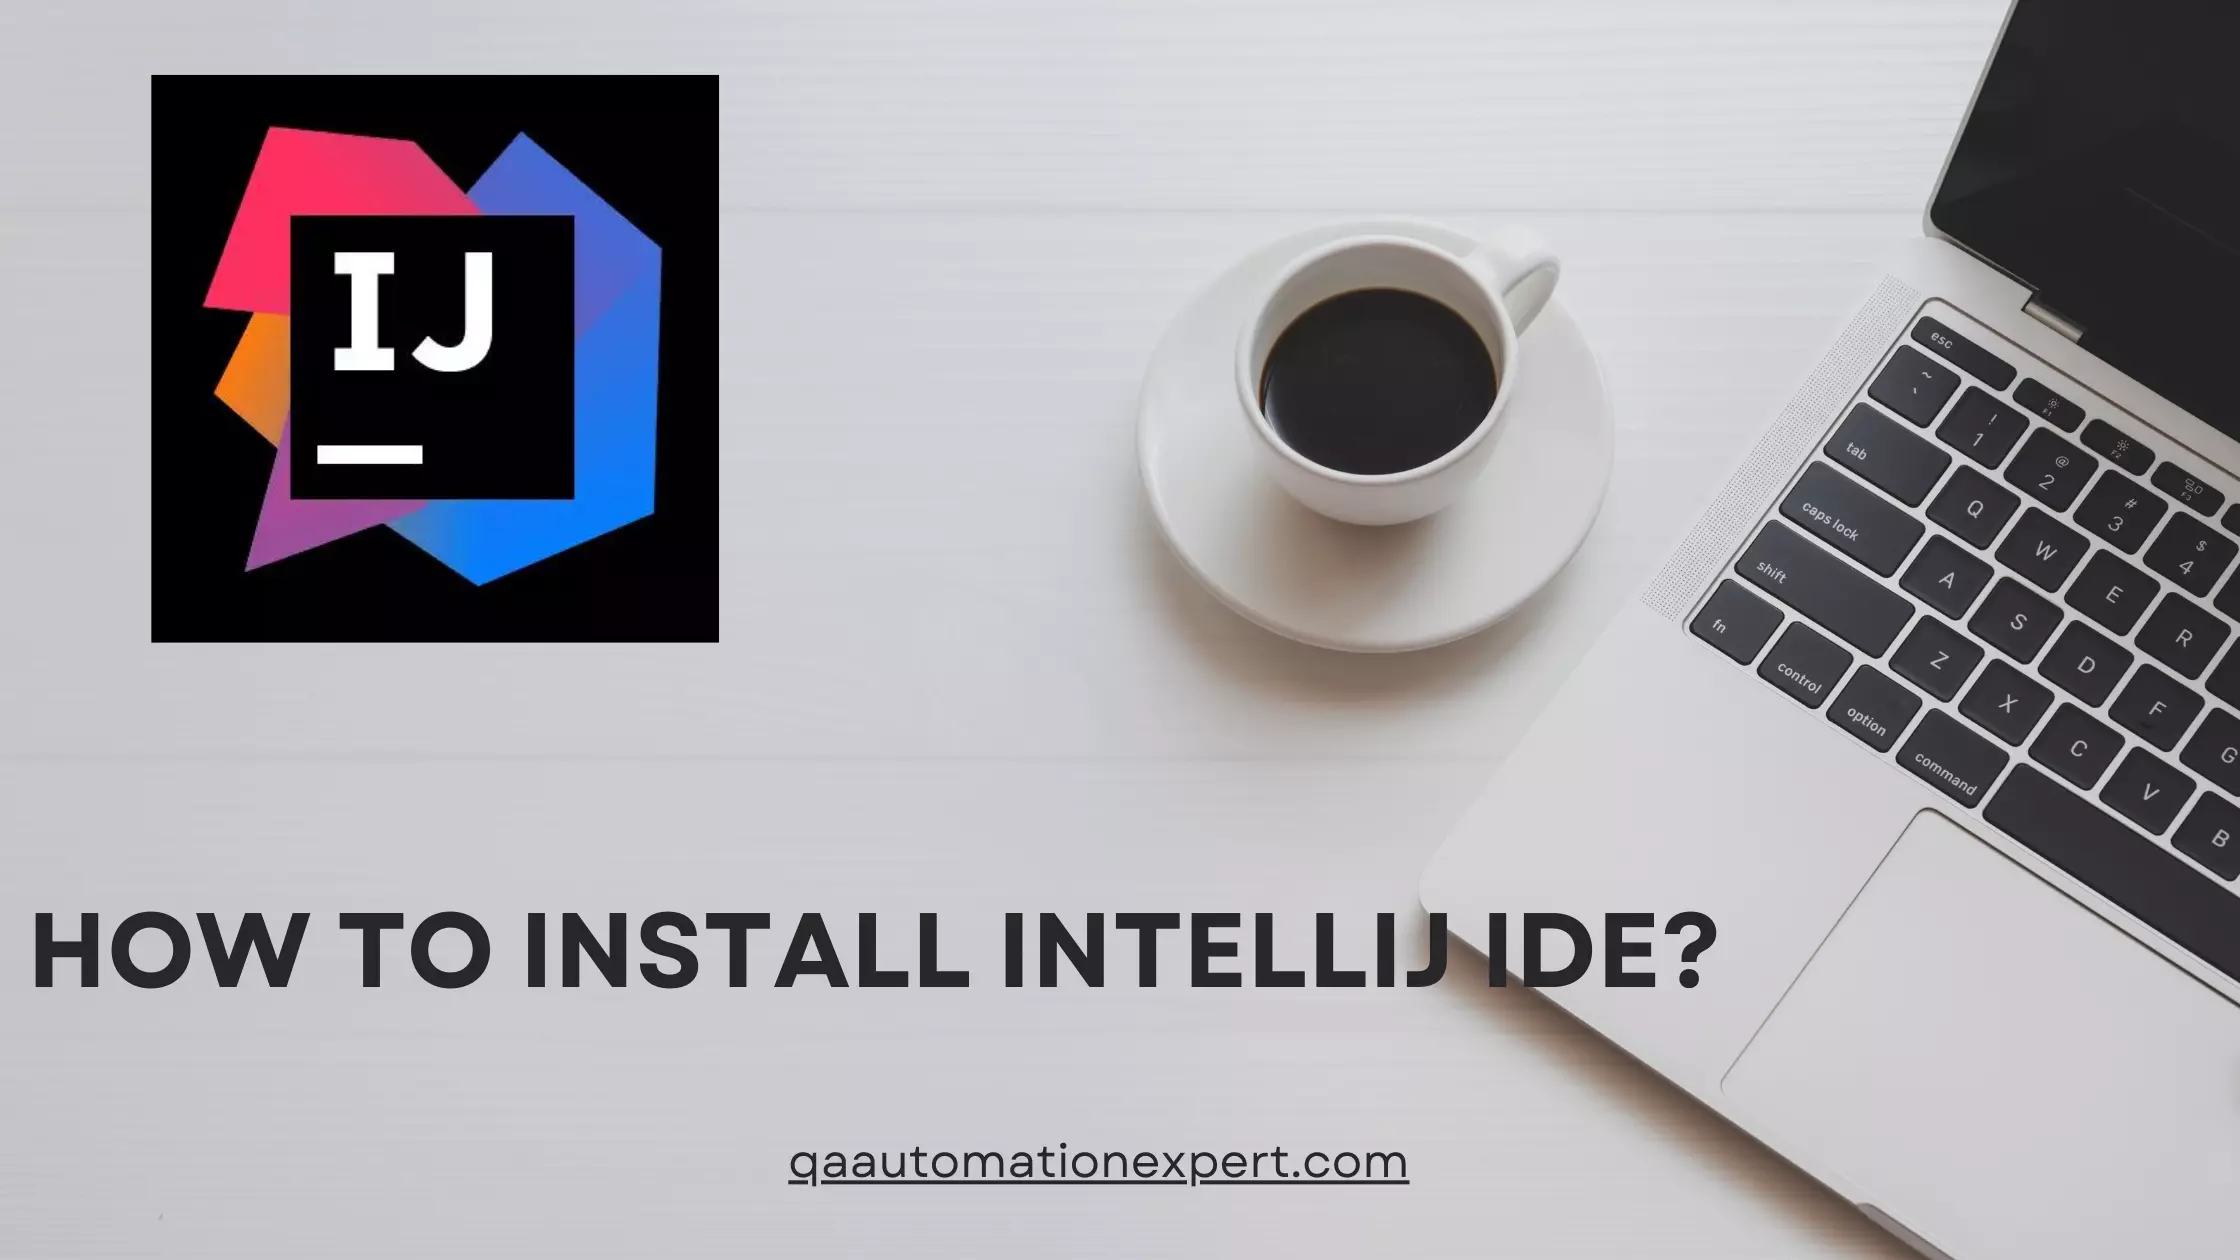 How to install Intellij IDE?